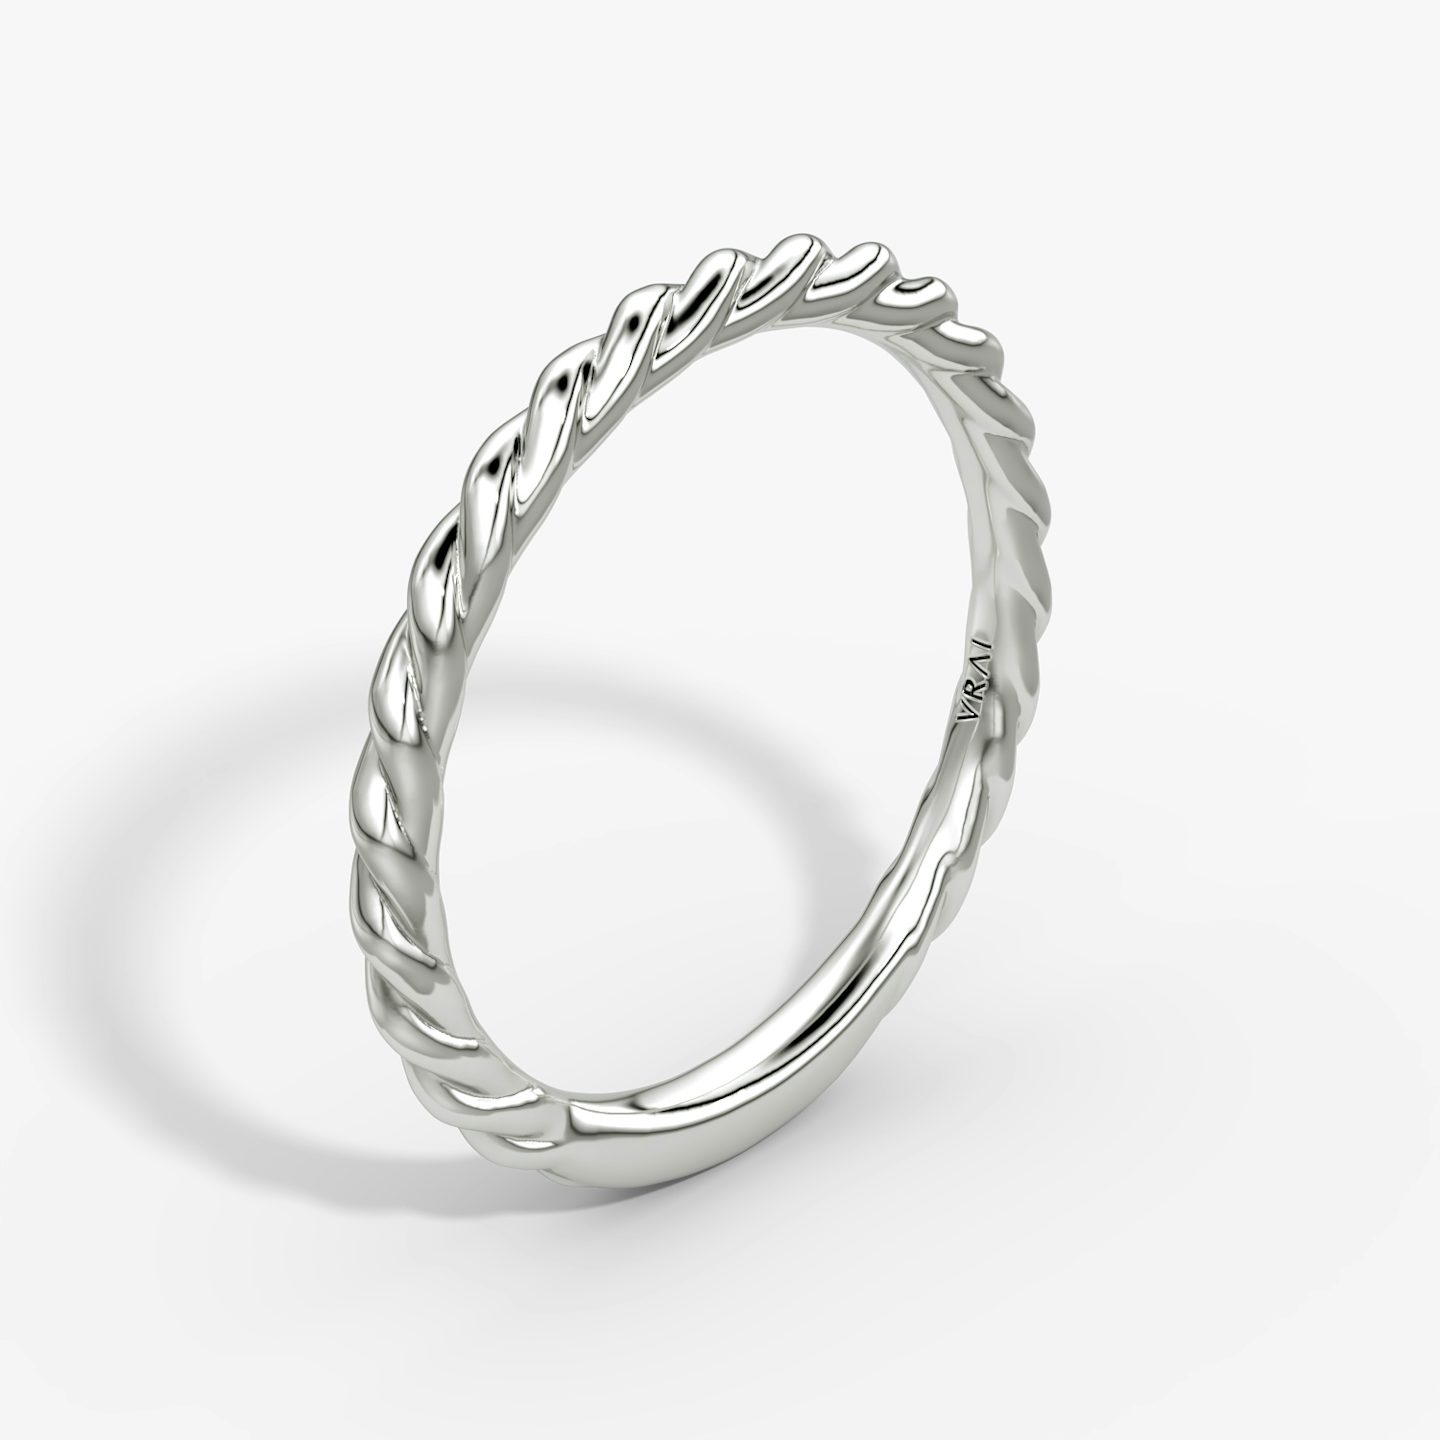 L'Alliance Rope | 18k | Or blanc 18 carats